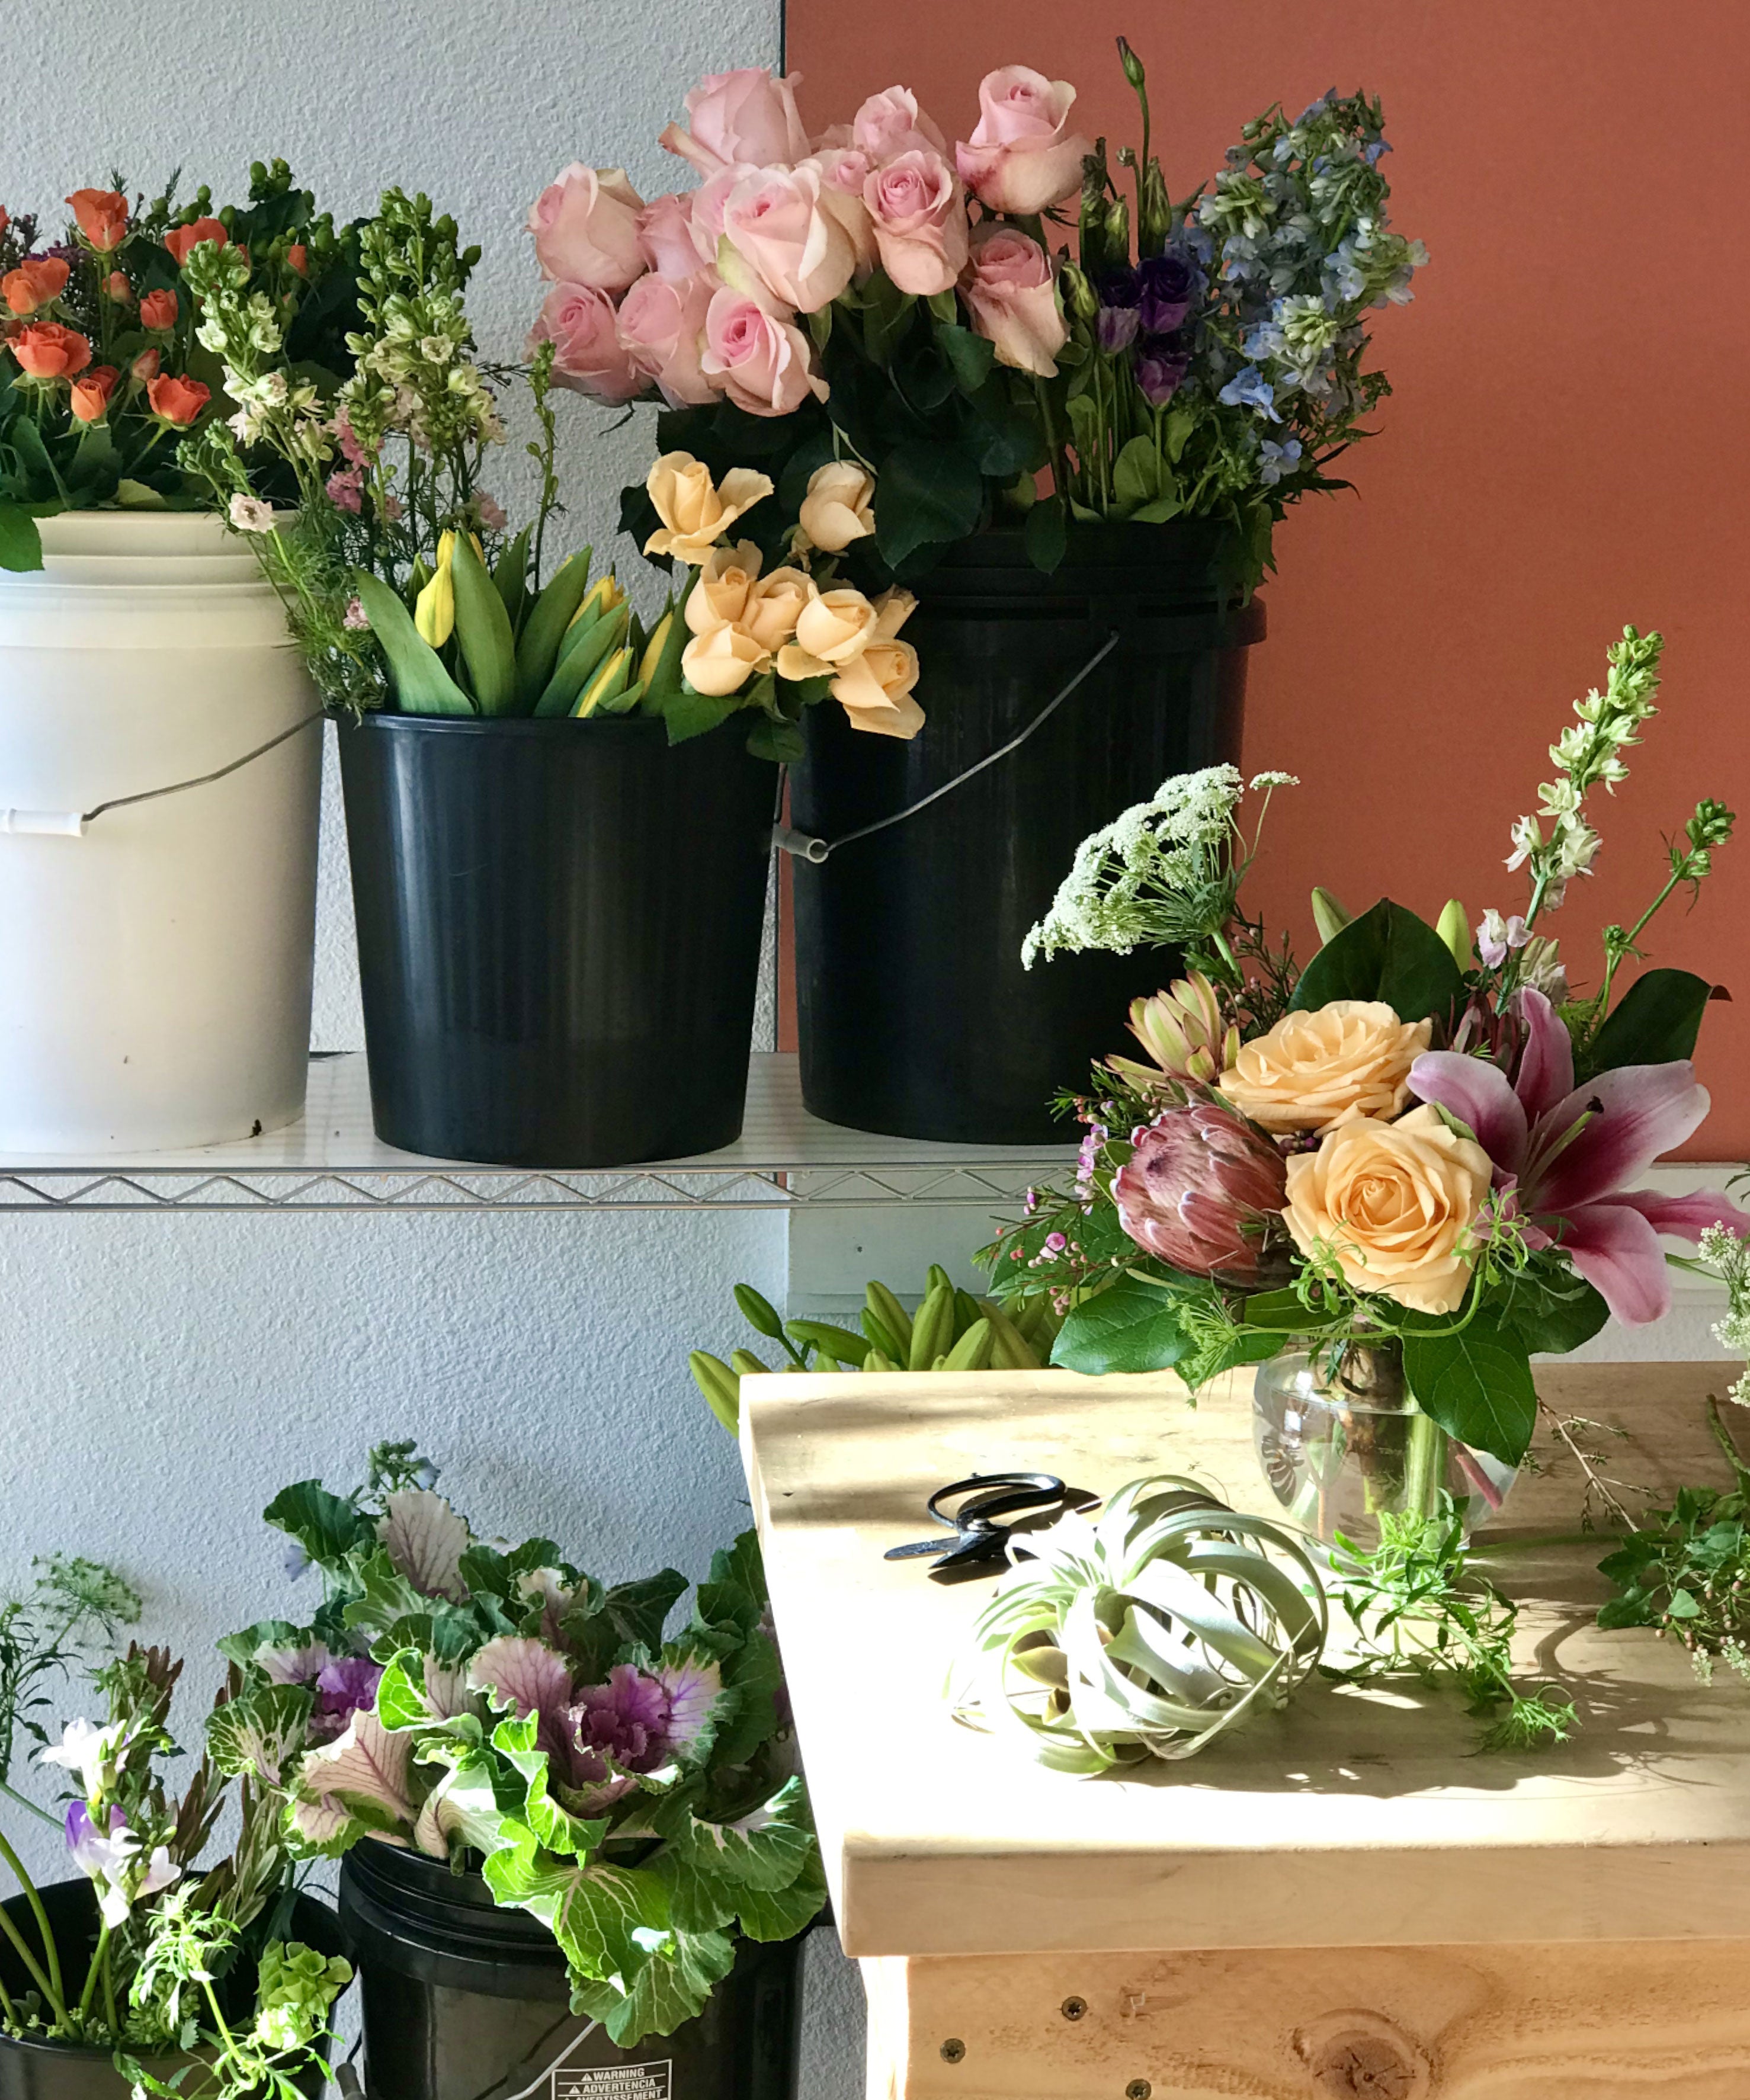 The Flower Whisperer” can help you preserve your special occasion flowers